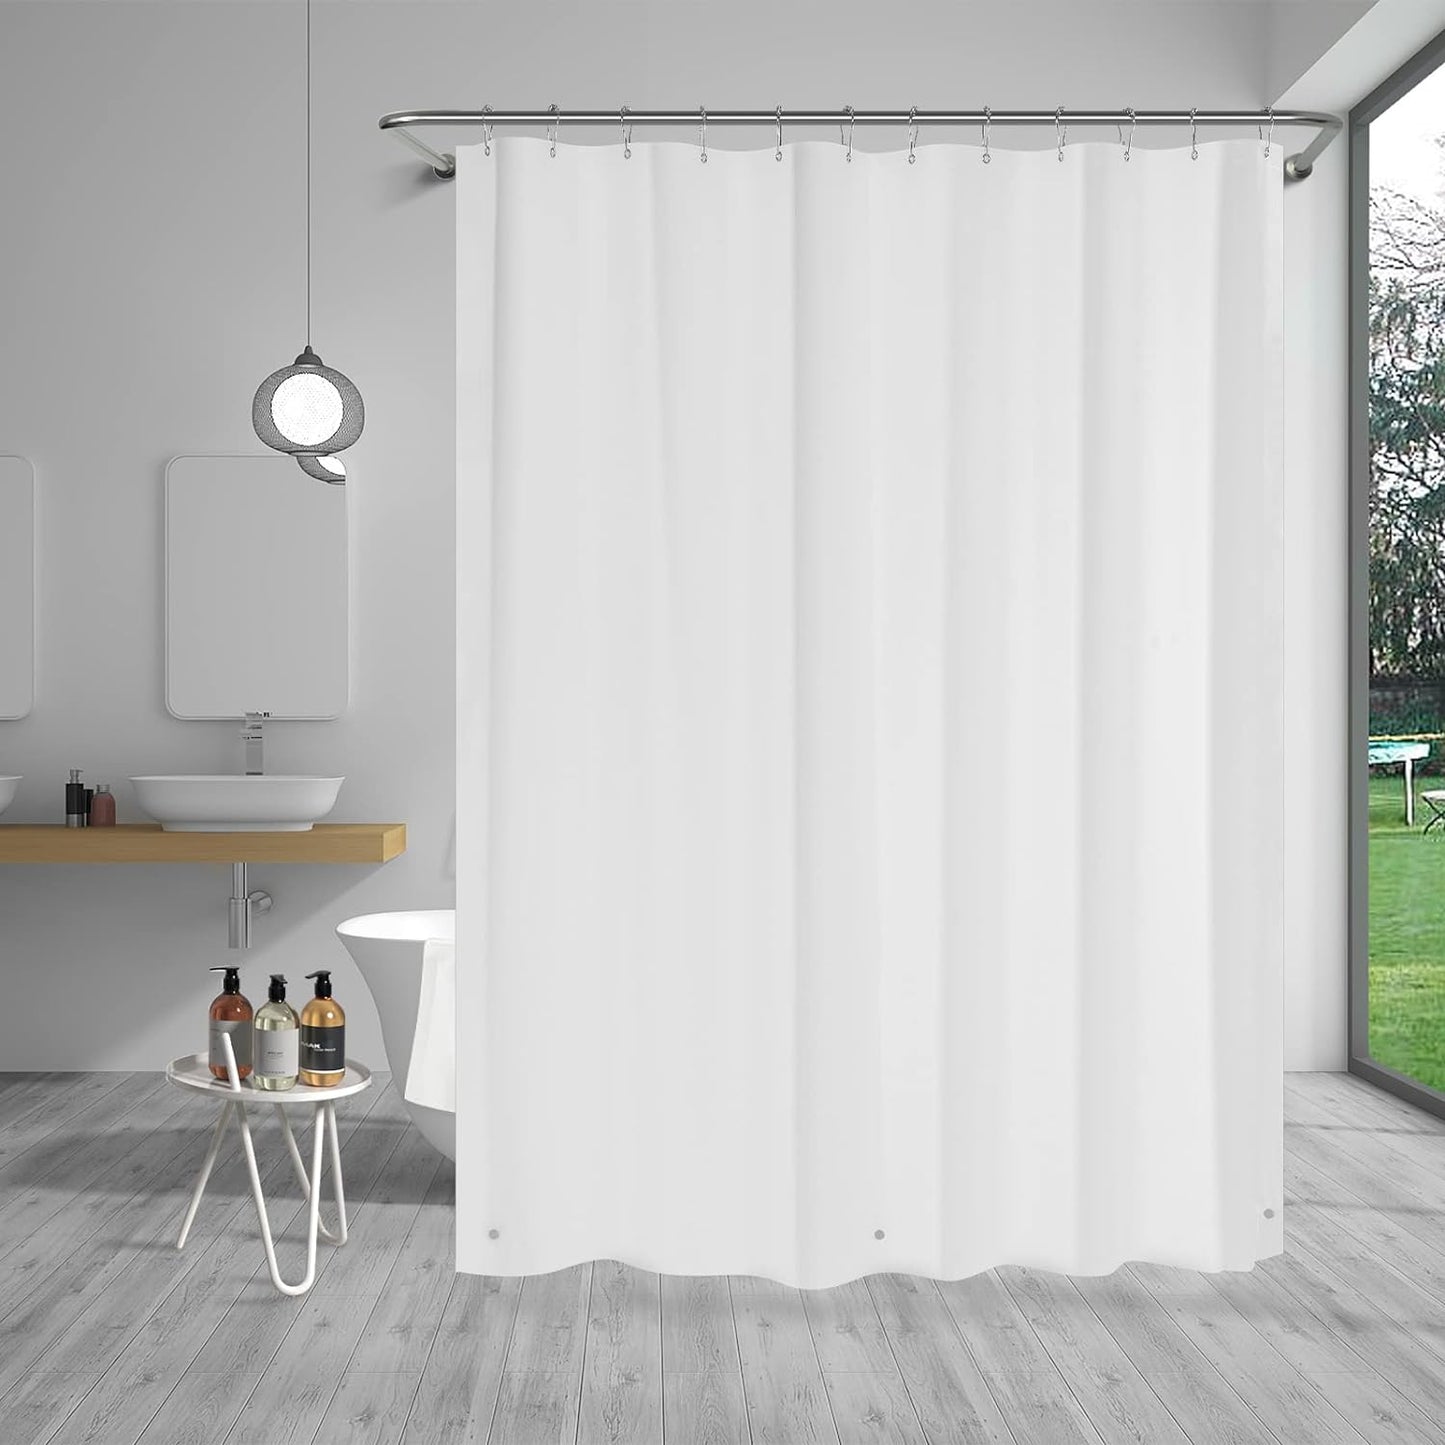 Bath Shower Curtain Liner, 72x72 Plastic White Shower Curtain Liner, Cute Waterproof PEVA Shower Curtains, Lightweight Shower Curtains for Bathroom with Magnets and 12 Rustproof Grommet Holes